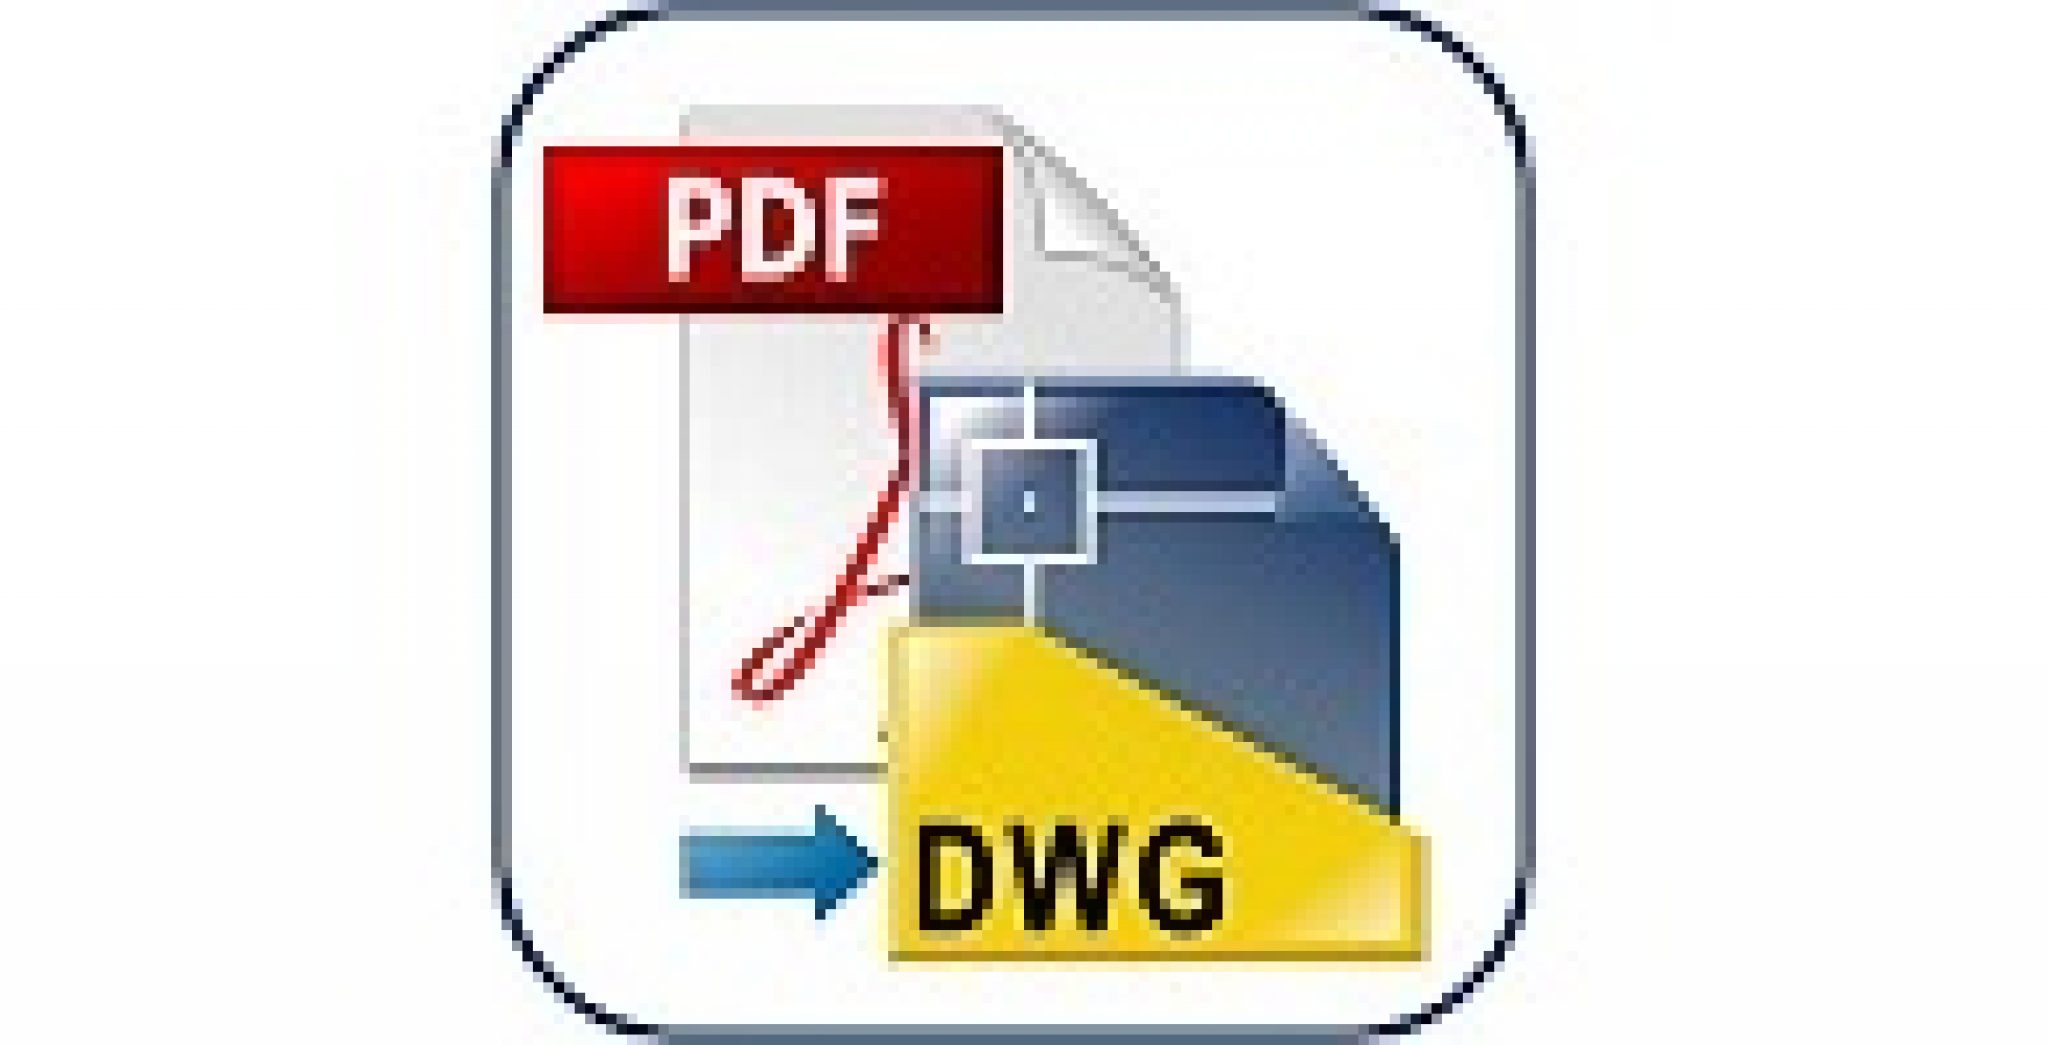 any dwg to pdf converter free download